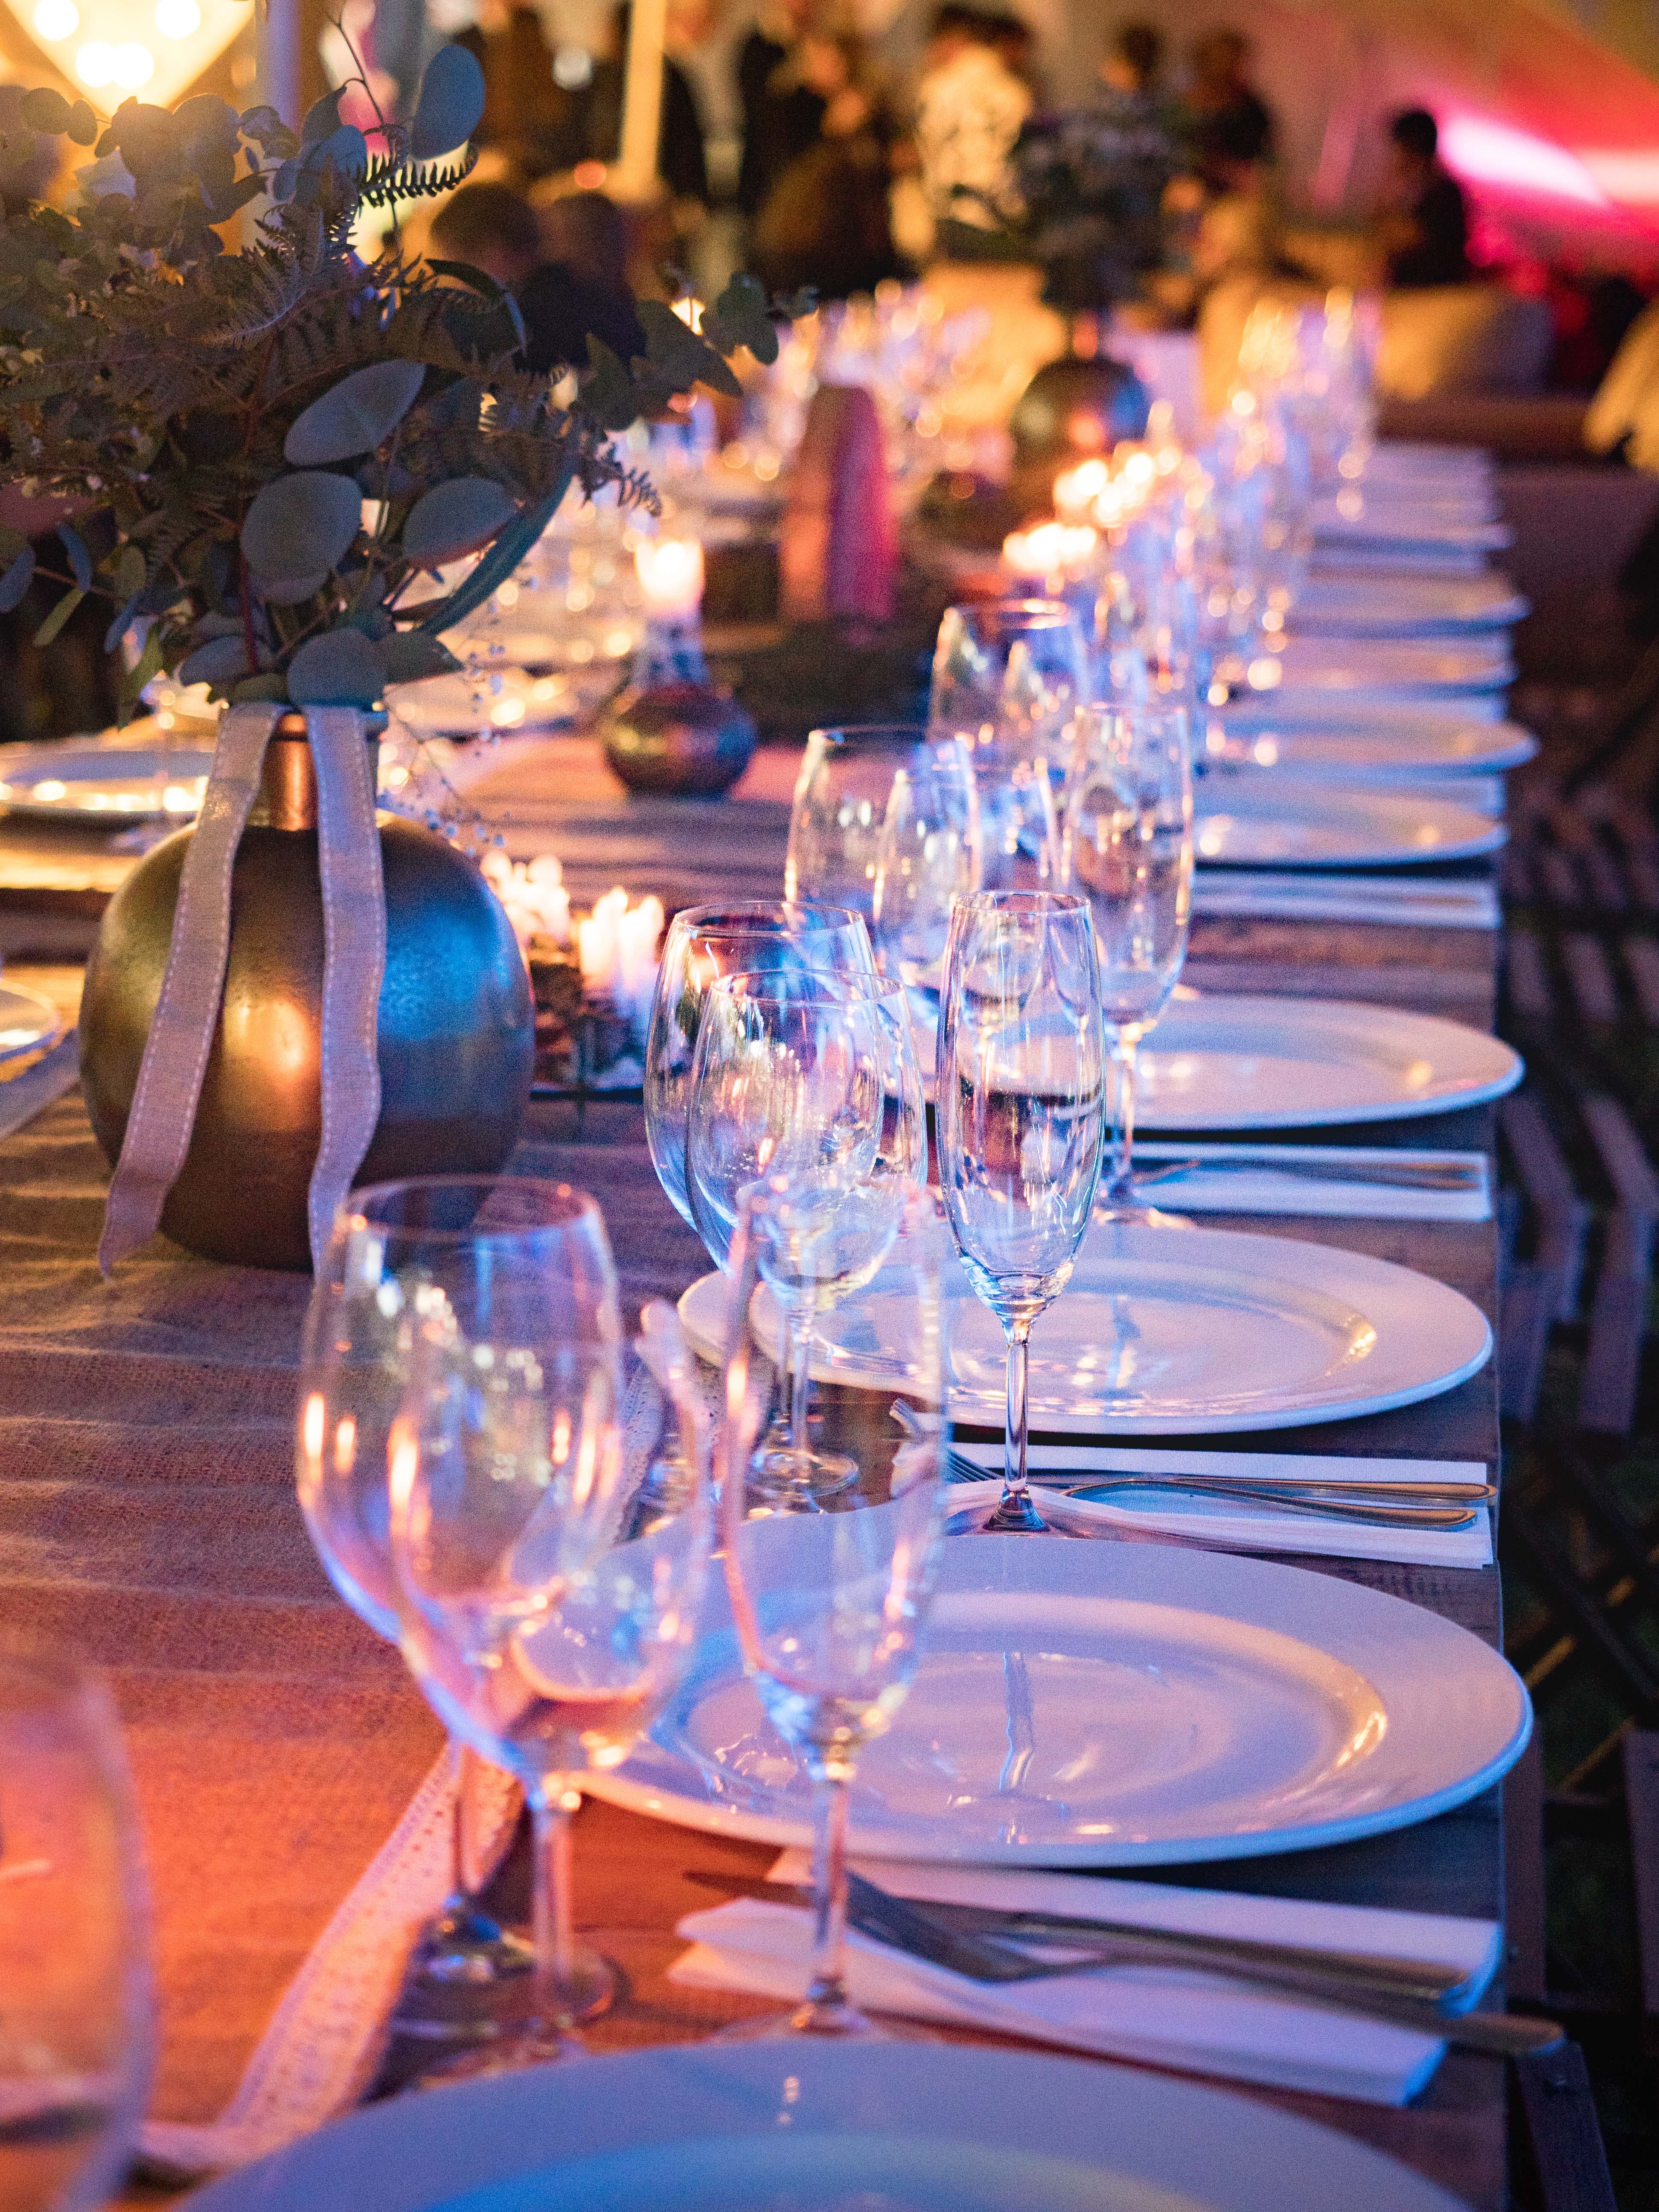 A table arrangement with glasses and plates at an outdoor event | Source: Pexels